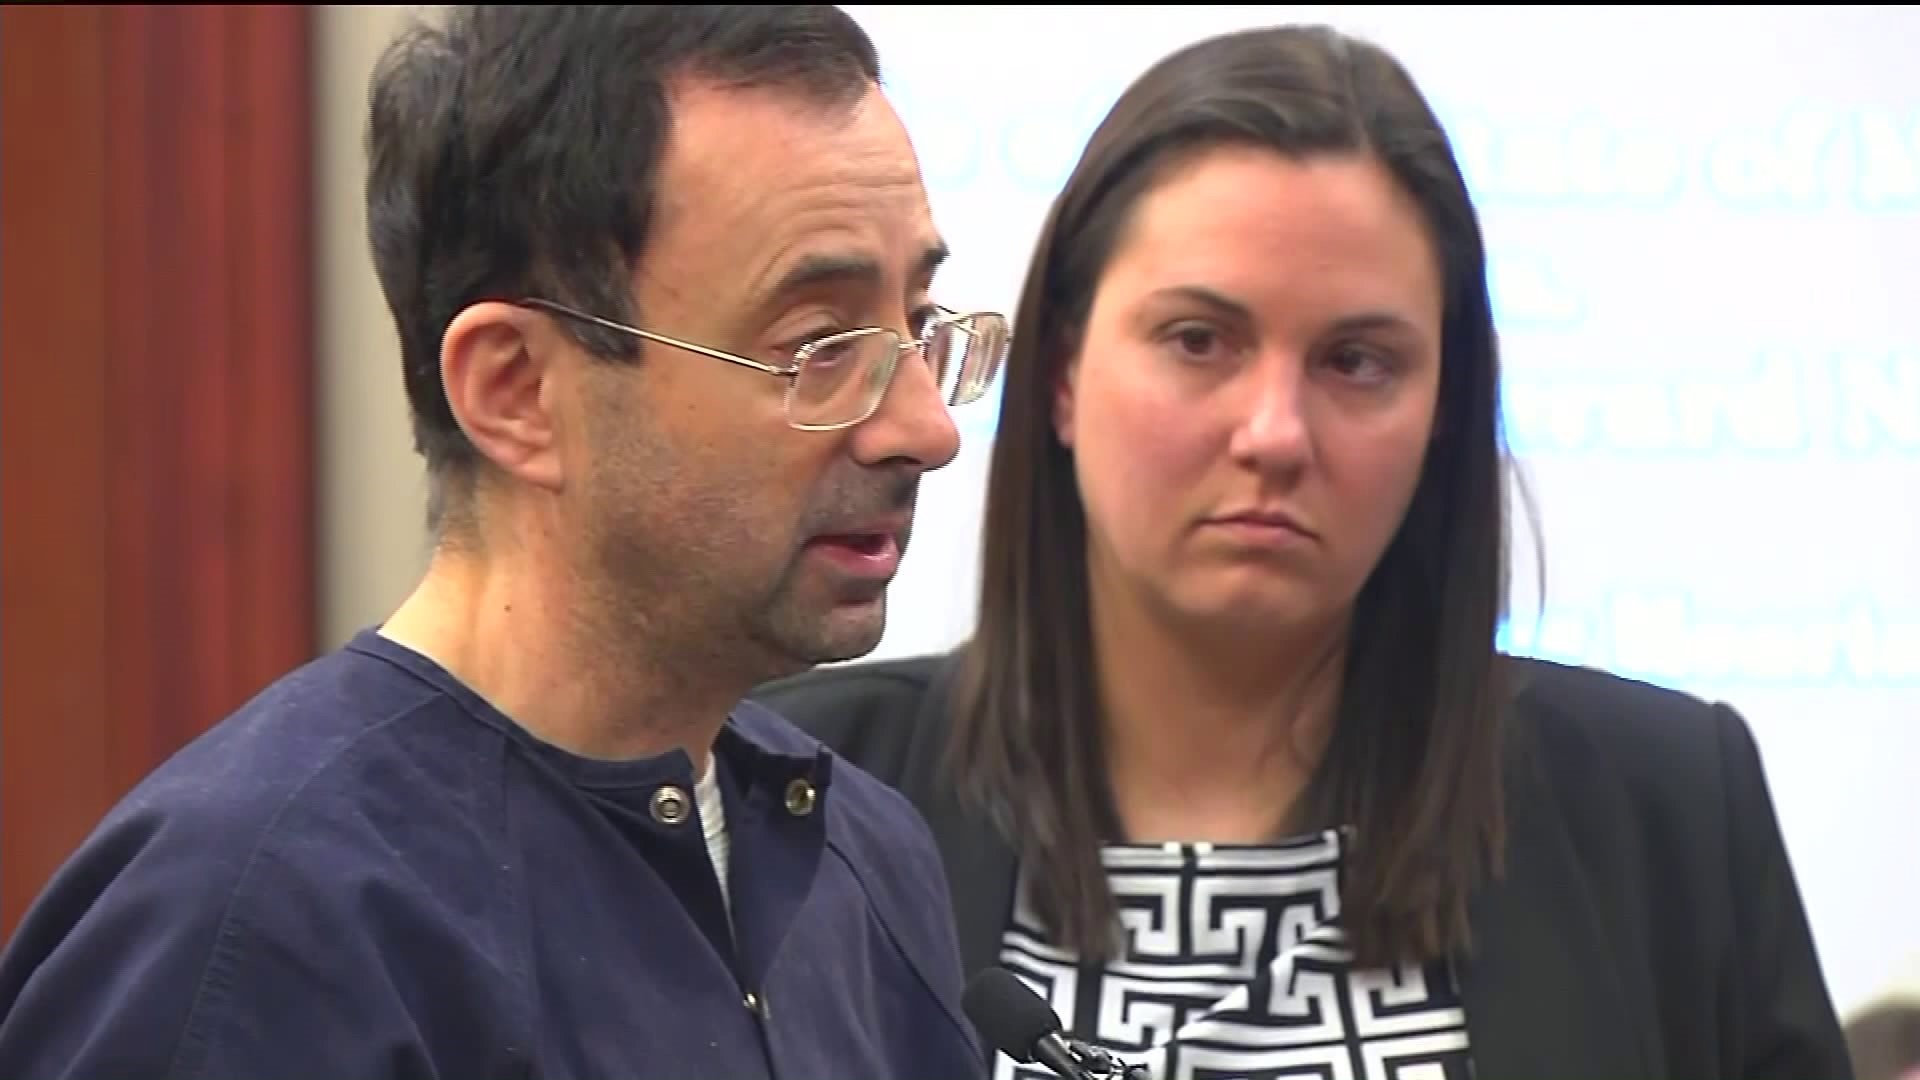 Ex-sports doctor Larry Nassar gets 40-175 years in prison